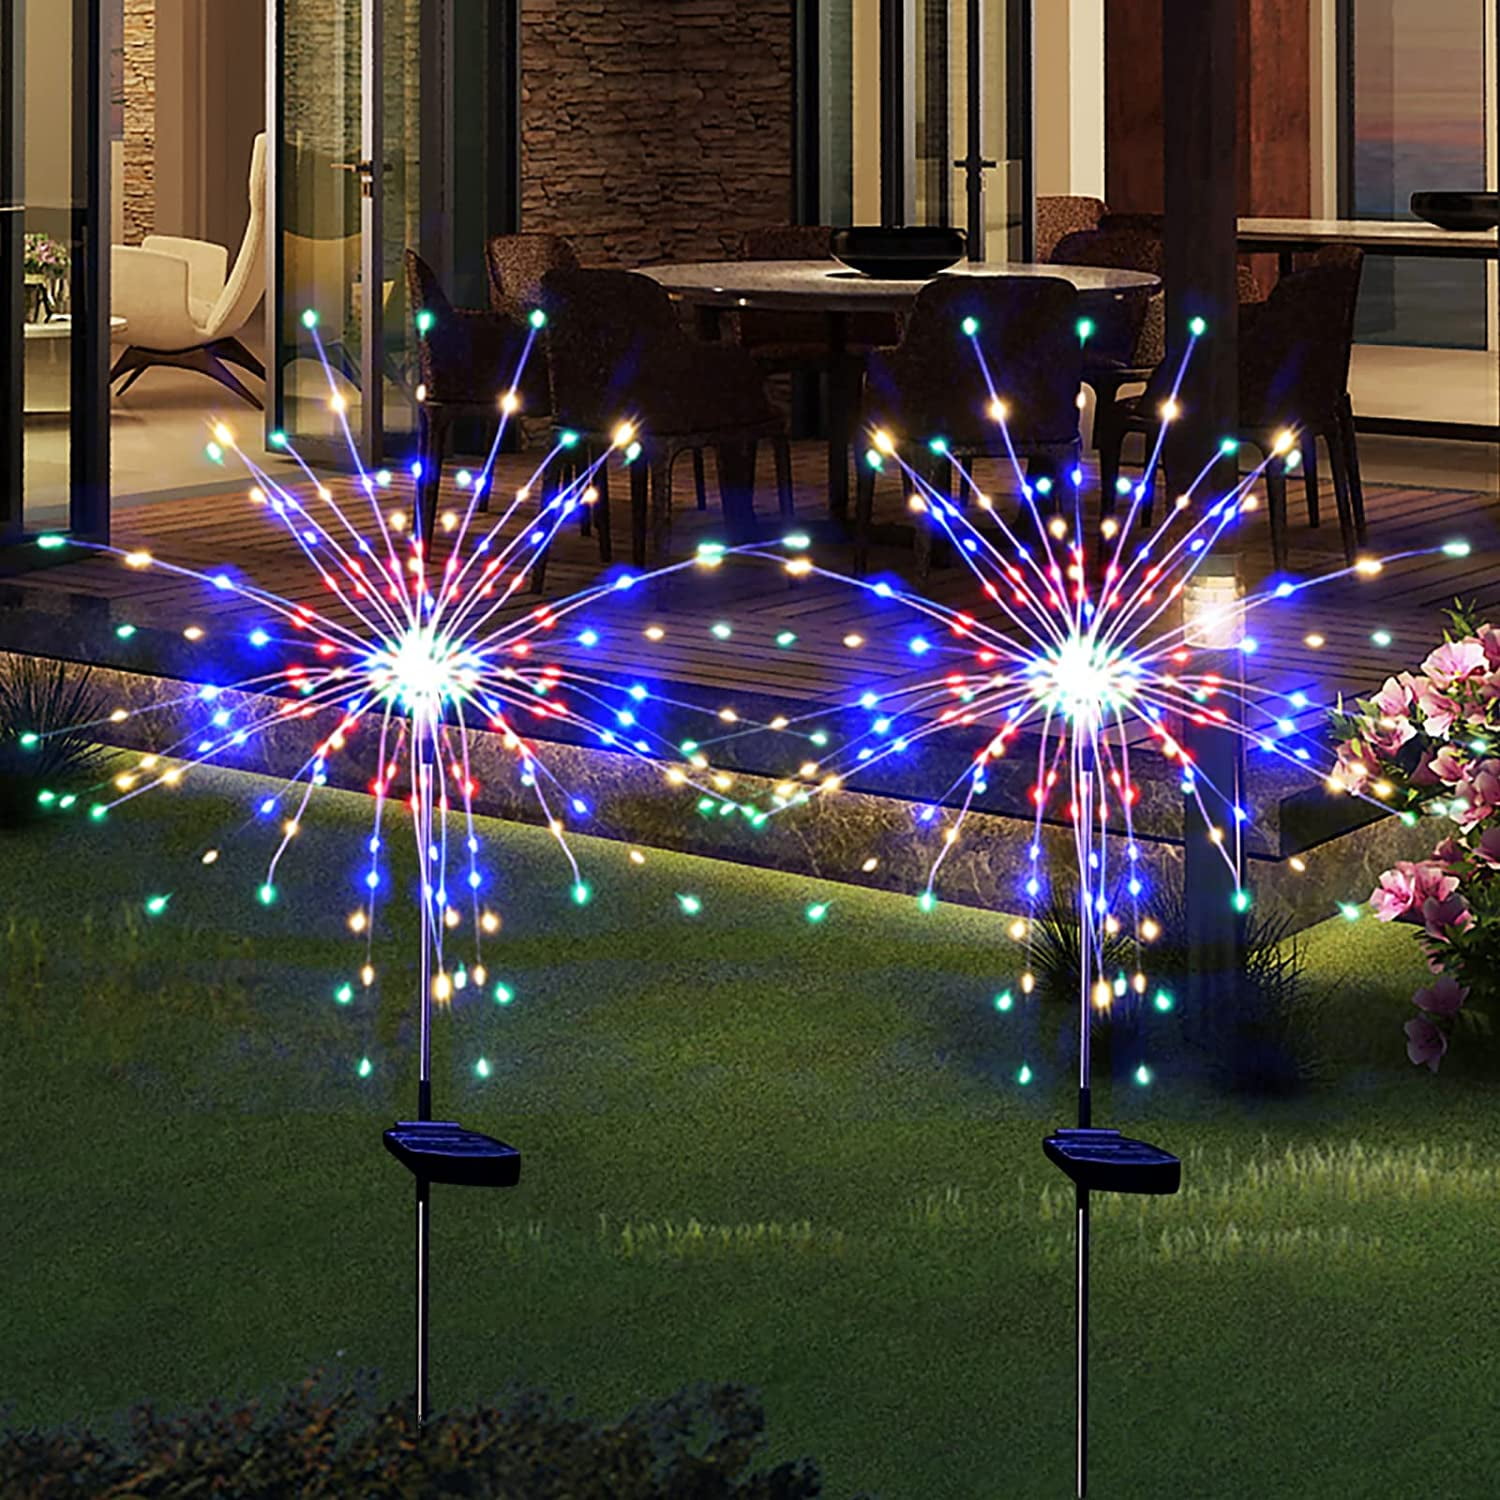 Wire Pathway Garden Outdoor Led String Lights Fairy Light Home Decor Star Lamp 